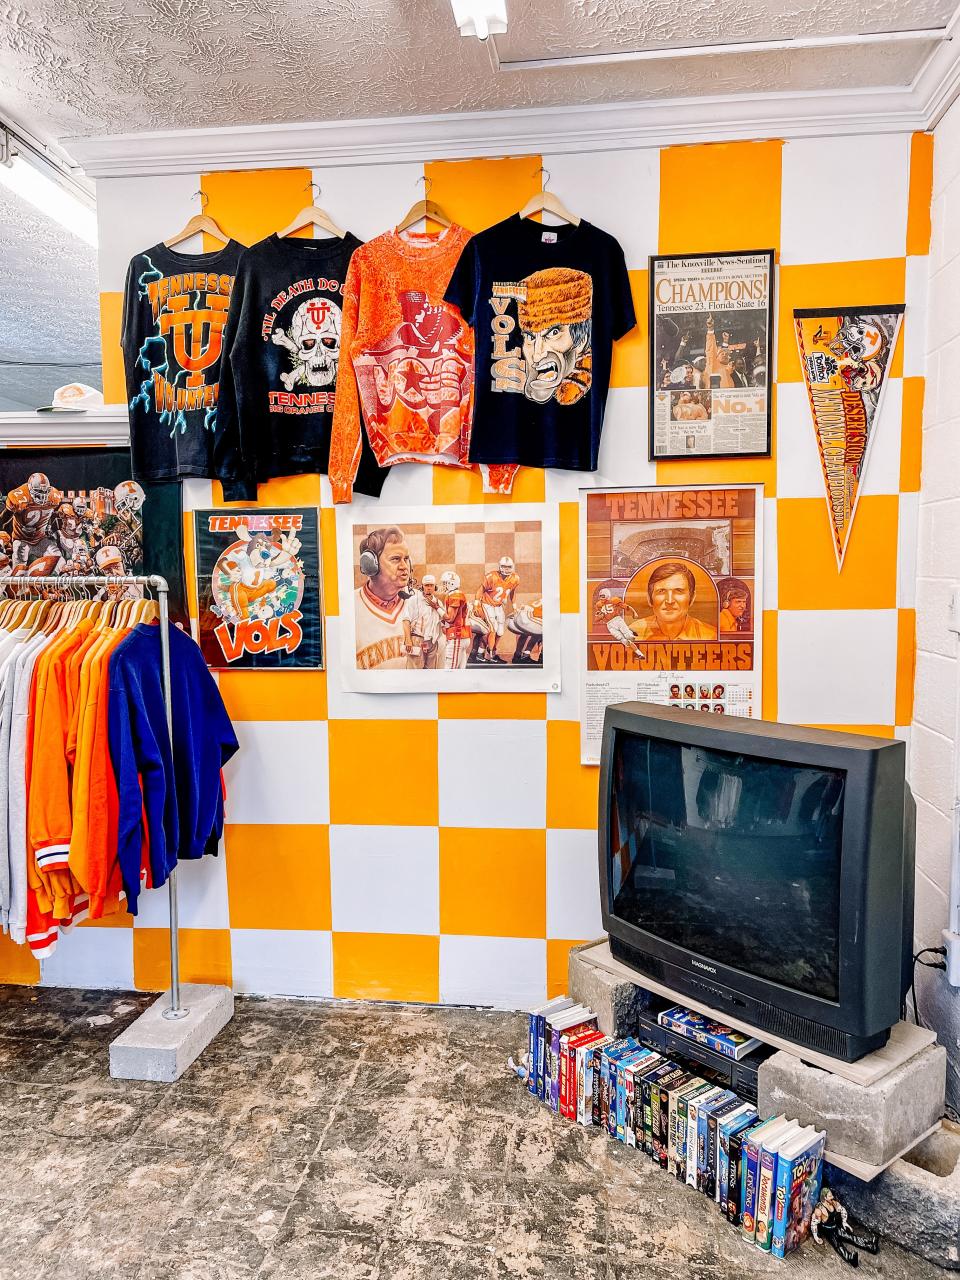 Four of Richie’s favorite T-shirts are displayed (and definitely not for sale) on the custom checkerboard wall.